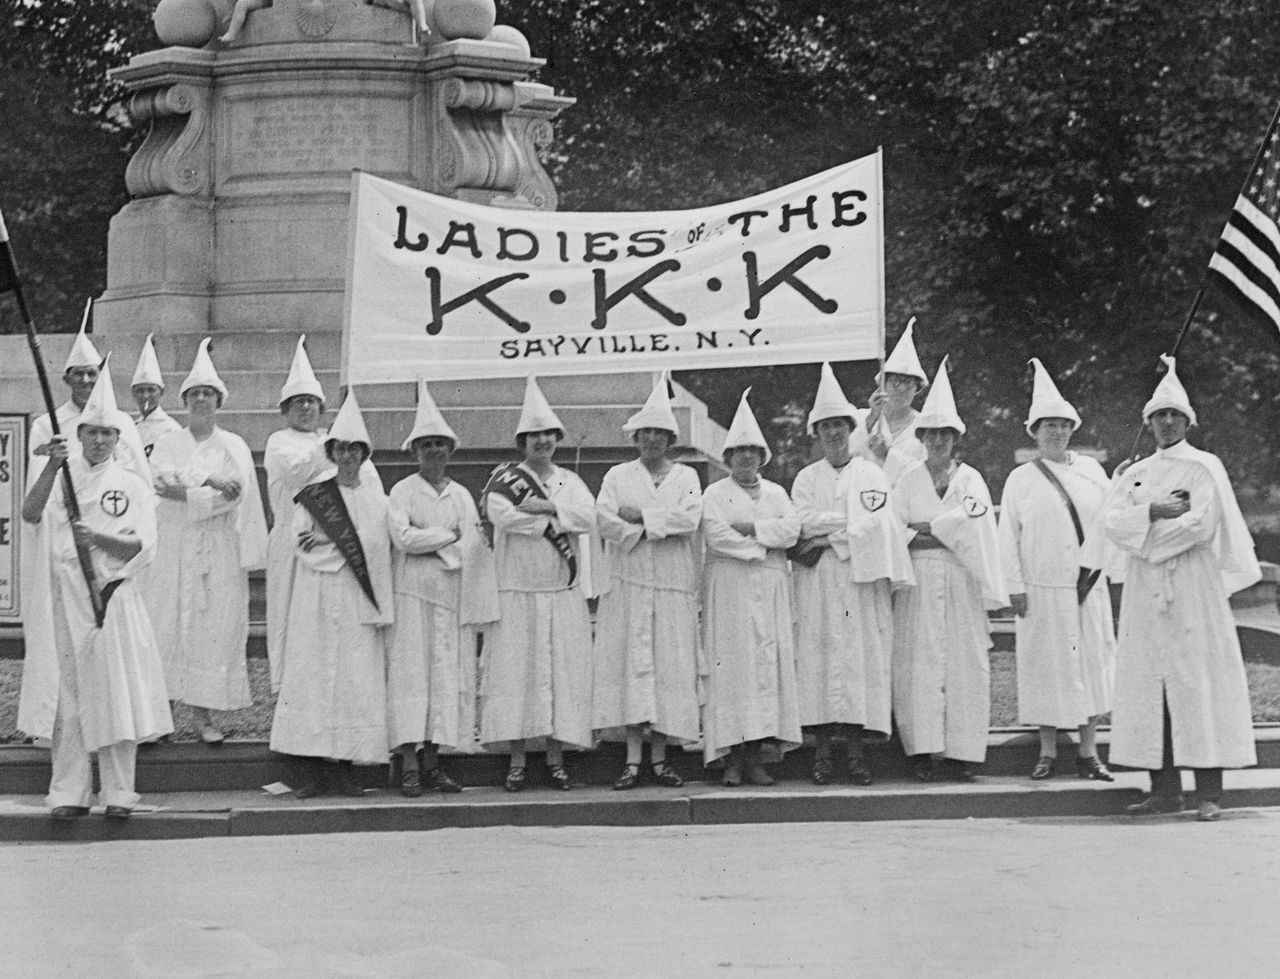 The women's auxiliary of the Ku Klux Klan of Sayville (New York) at the Peace Monument in Washington, D.C., where they participated in a KKK parade in August 1925.